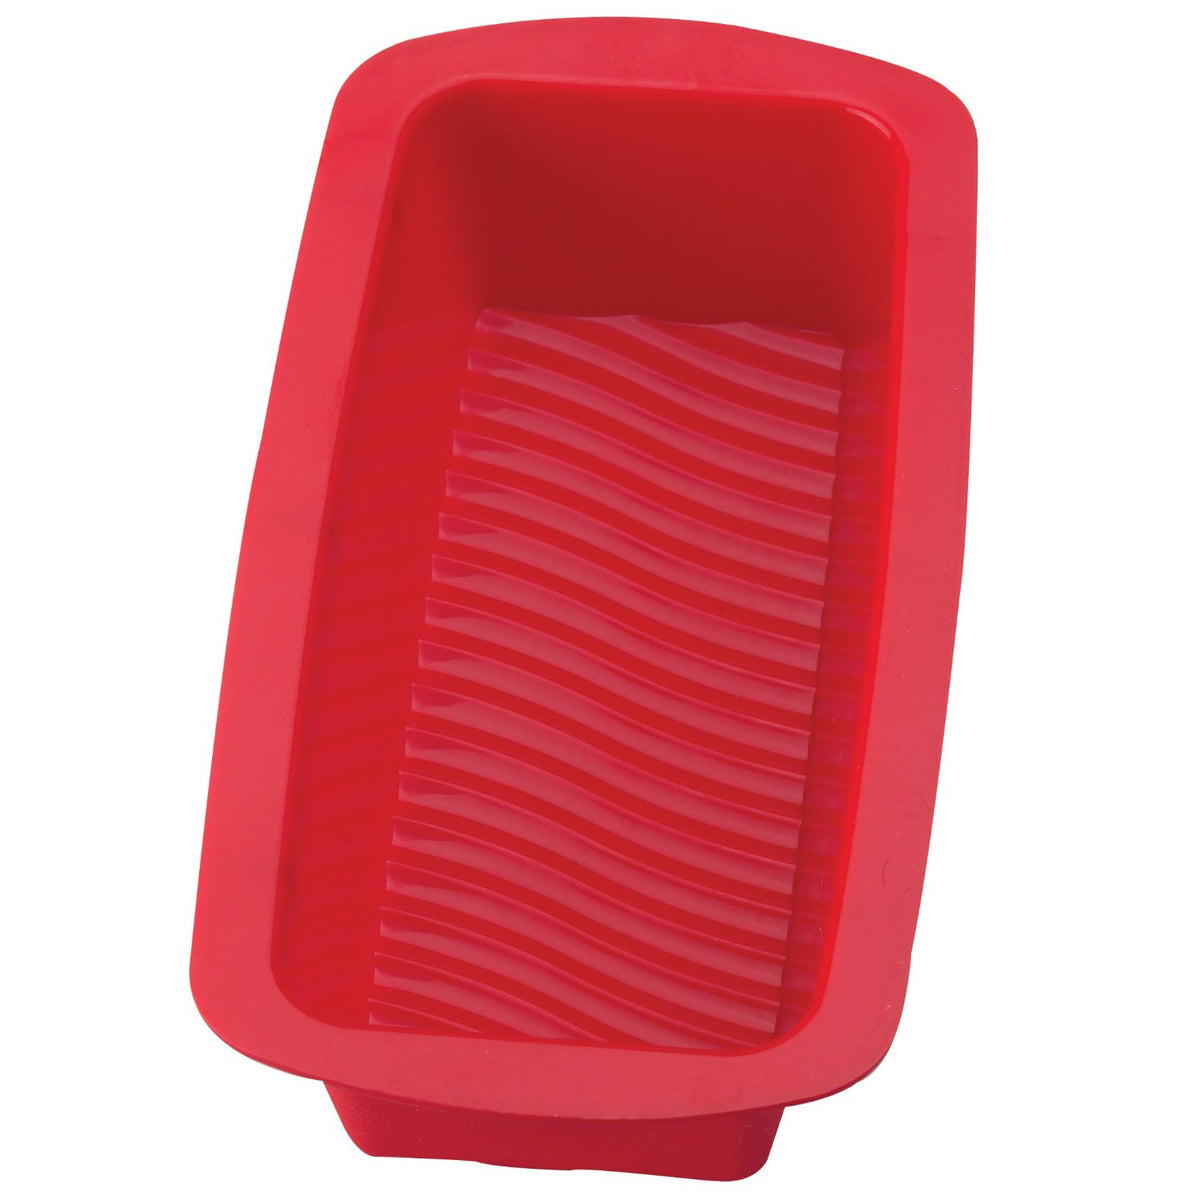 The Essentials 43634 Silicone Loaf Pan, 9-1/2" x 4" x 2-1/2"